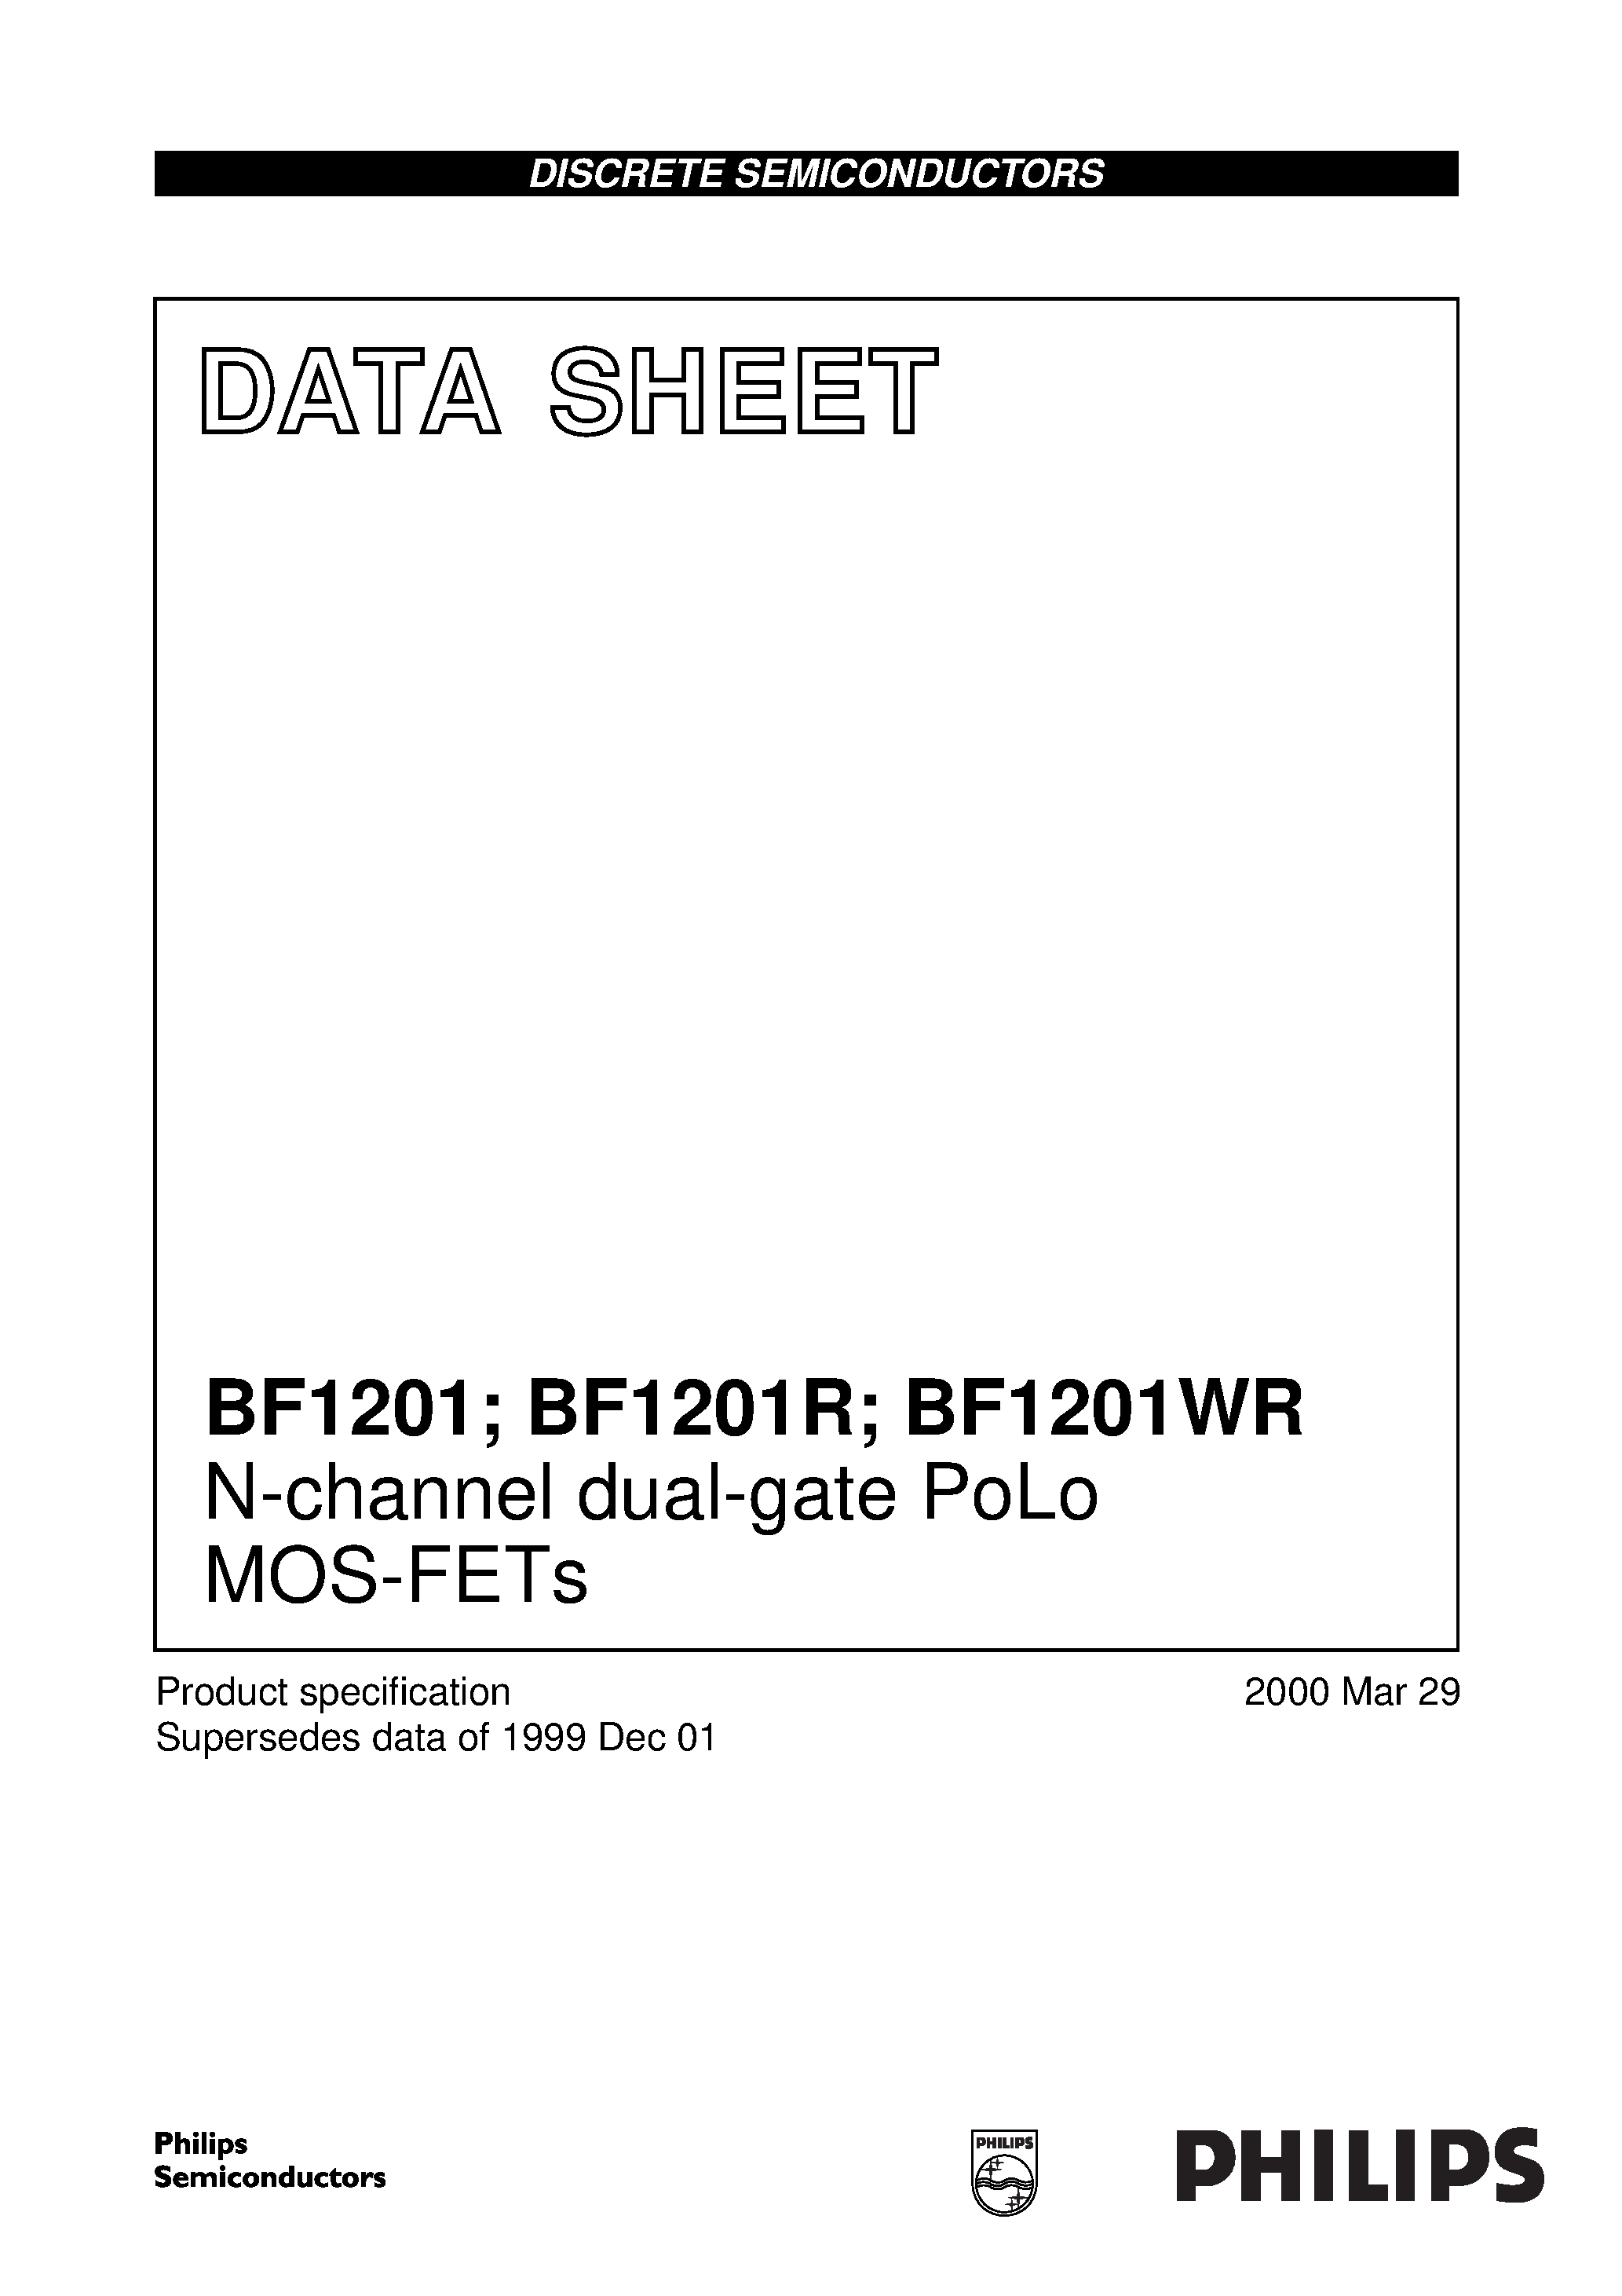 Datasheet BF1201 - N-channel dual-gate PoLo MOS-FETs page 1